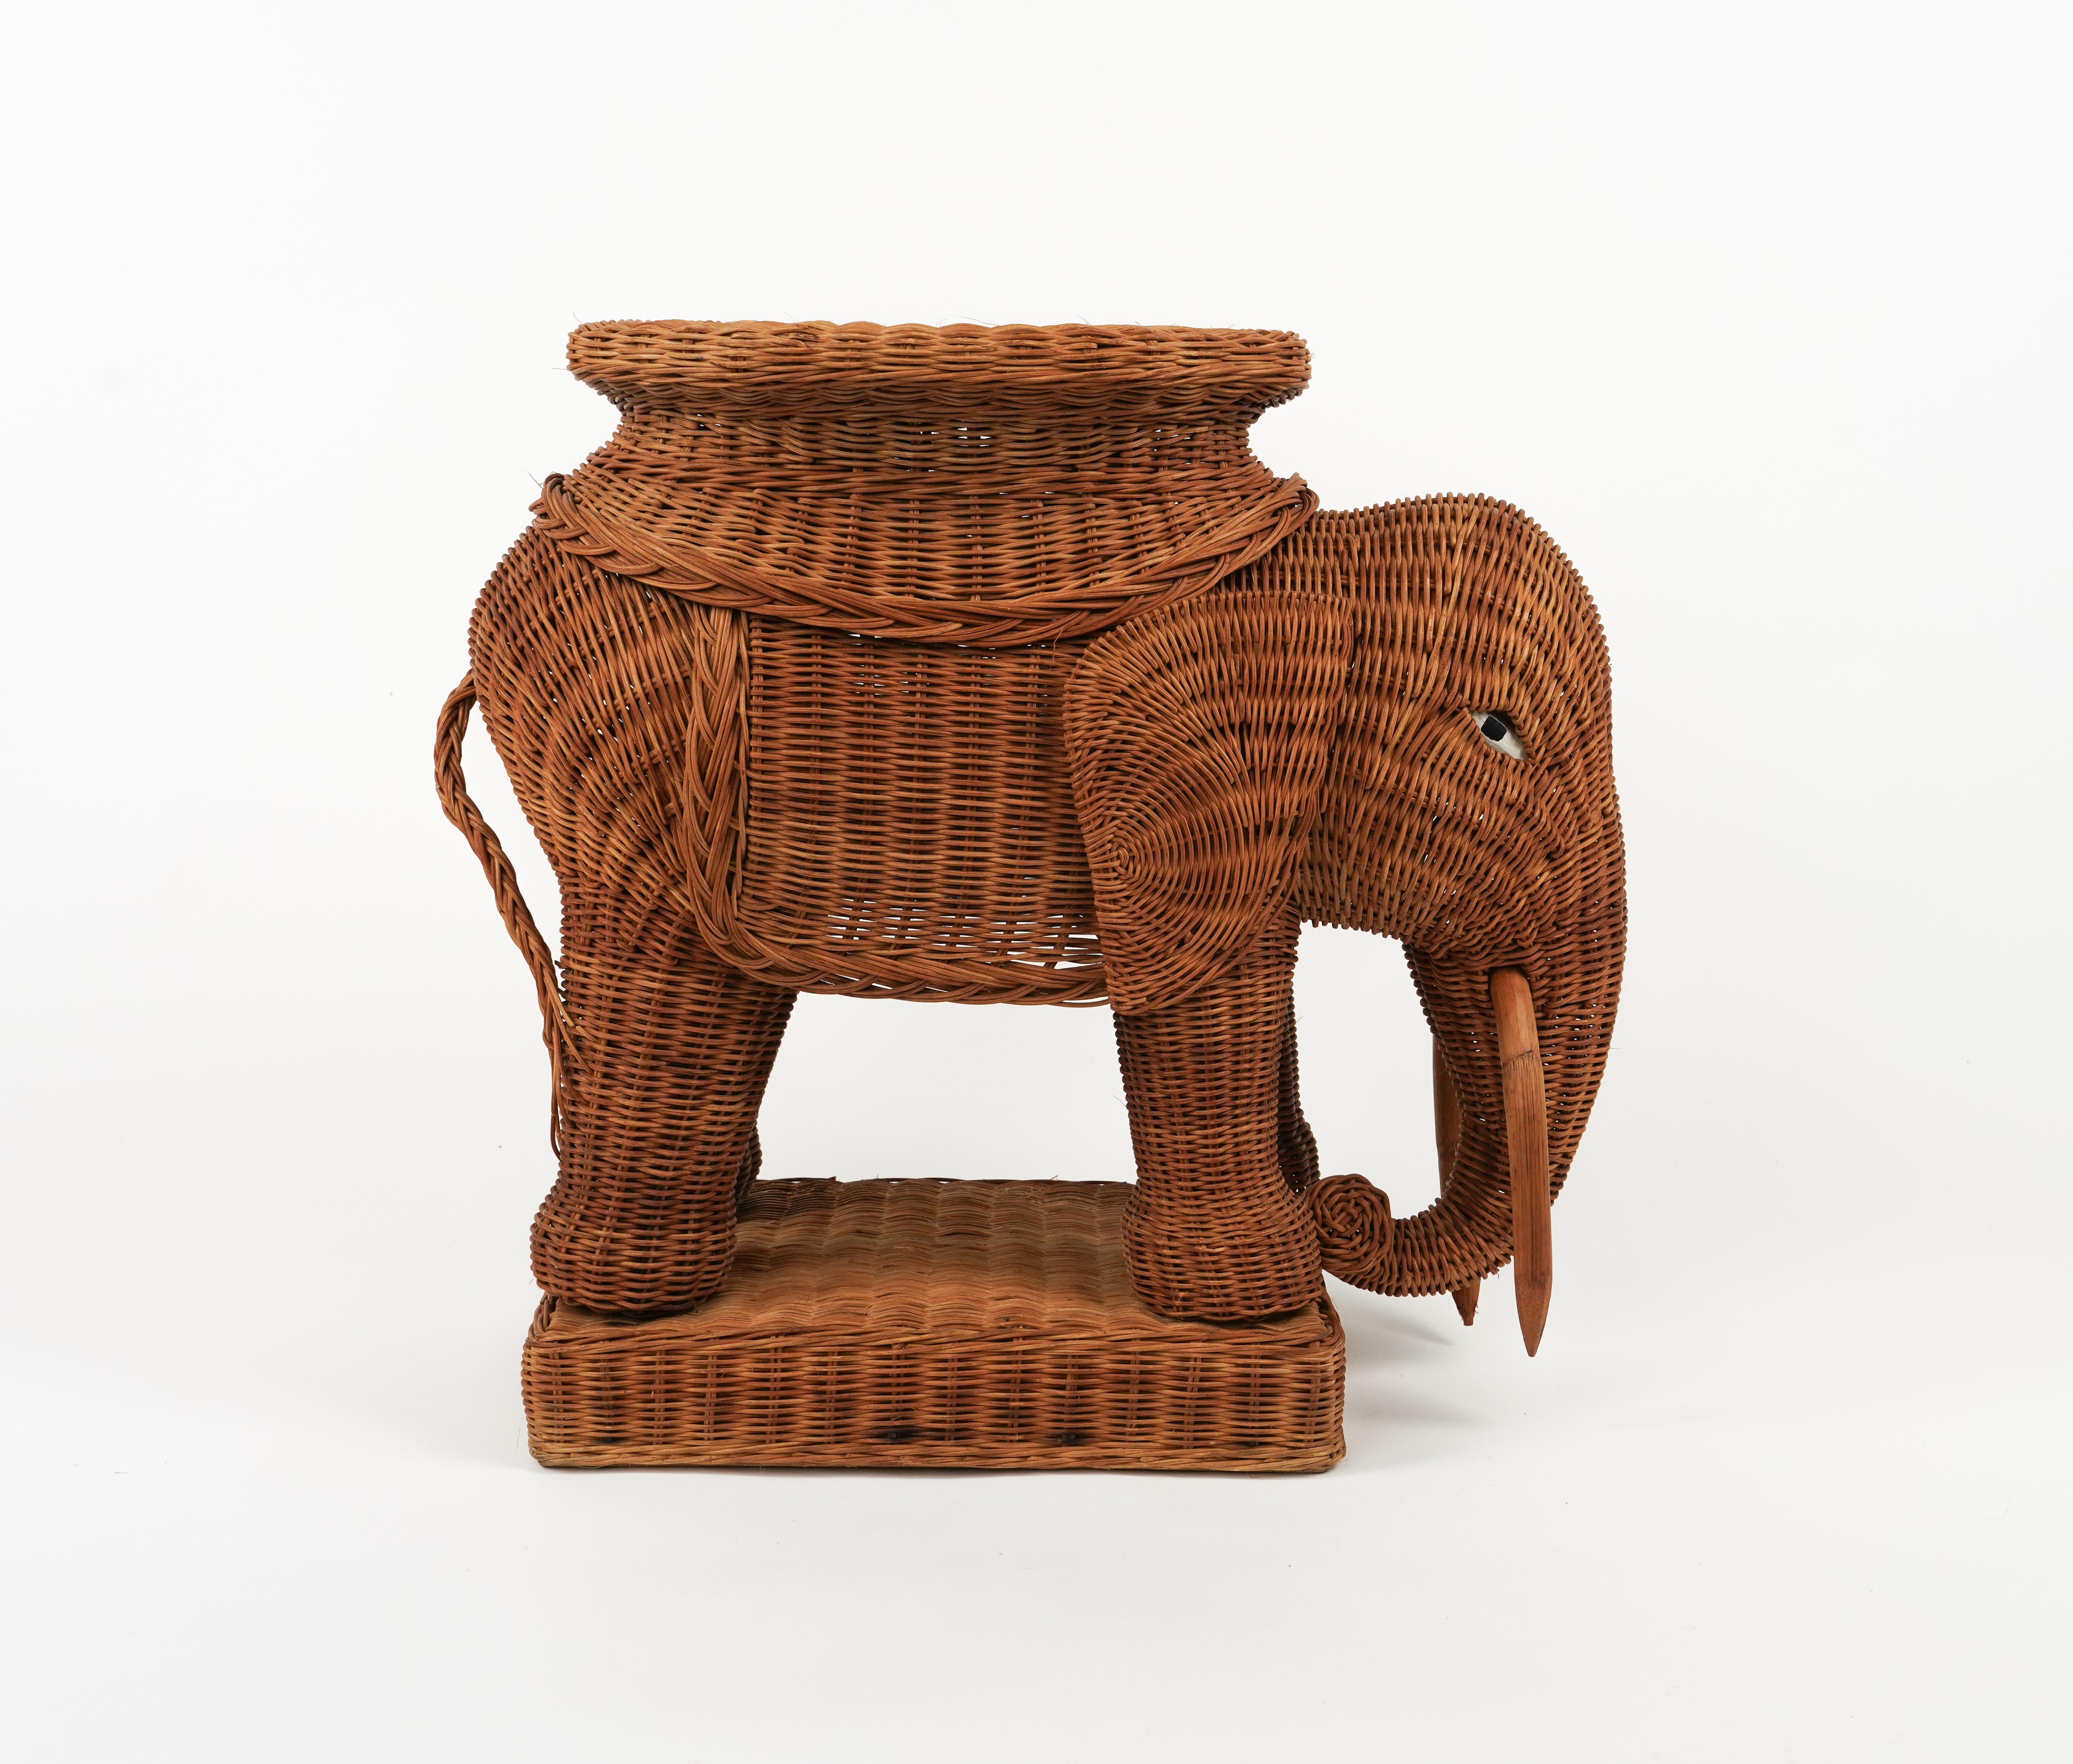 Rattan and Wicker Elephant Side Coffee Table Vivai Del Sud Style, Italy, 1960s For Sale 8